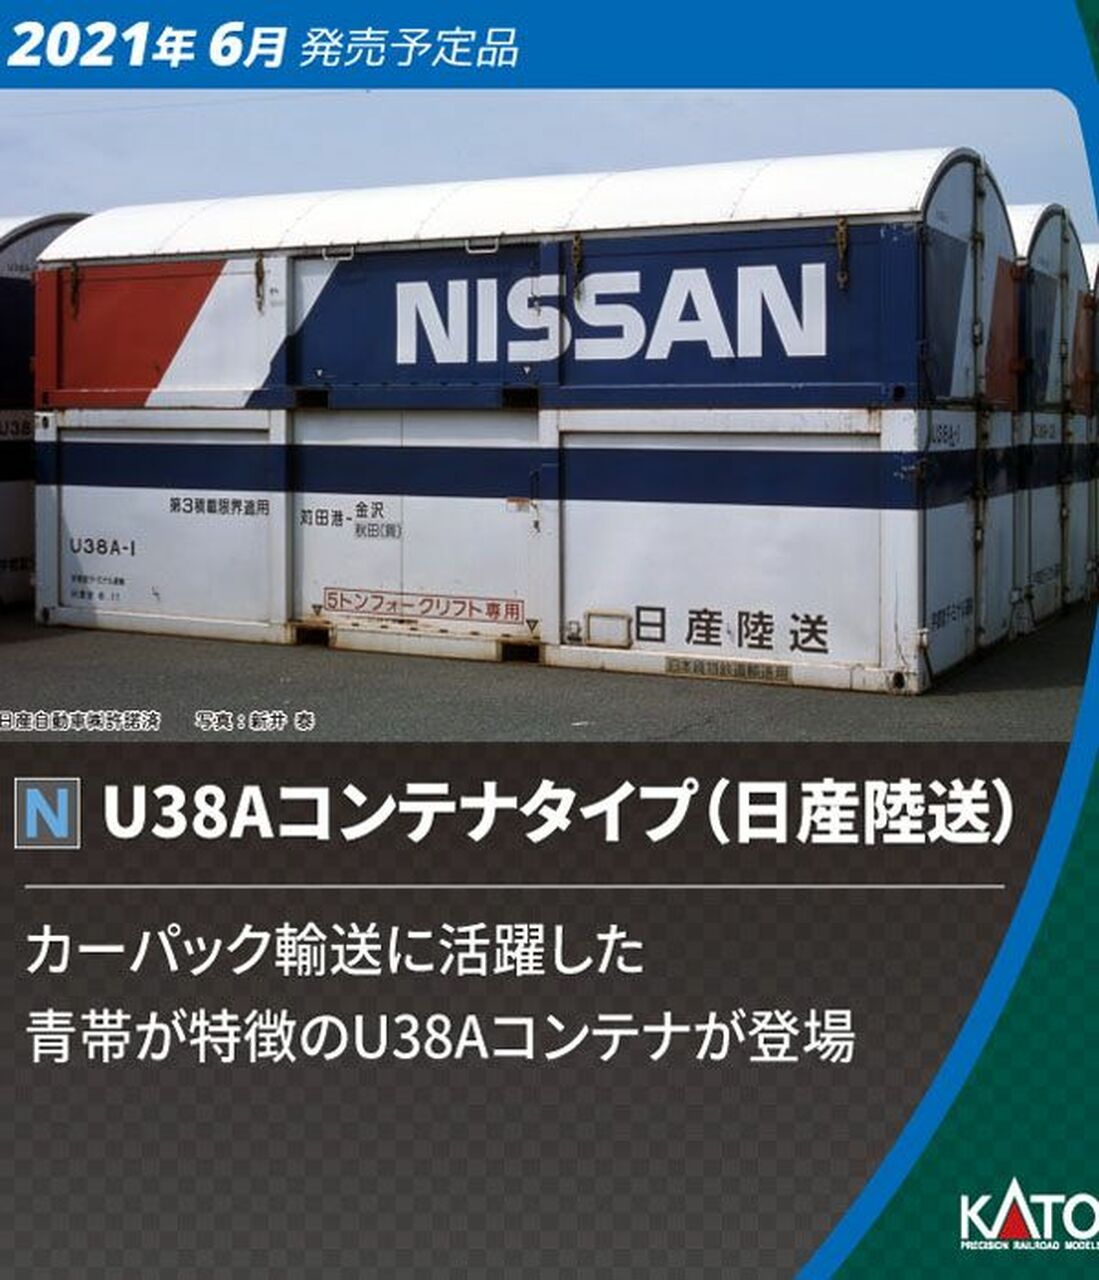 23-503-A Container U38A Style (Nissan Rikuso)